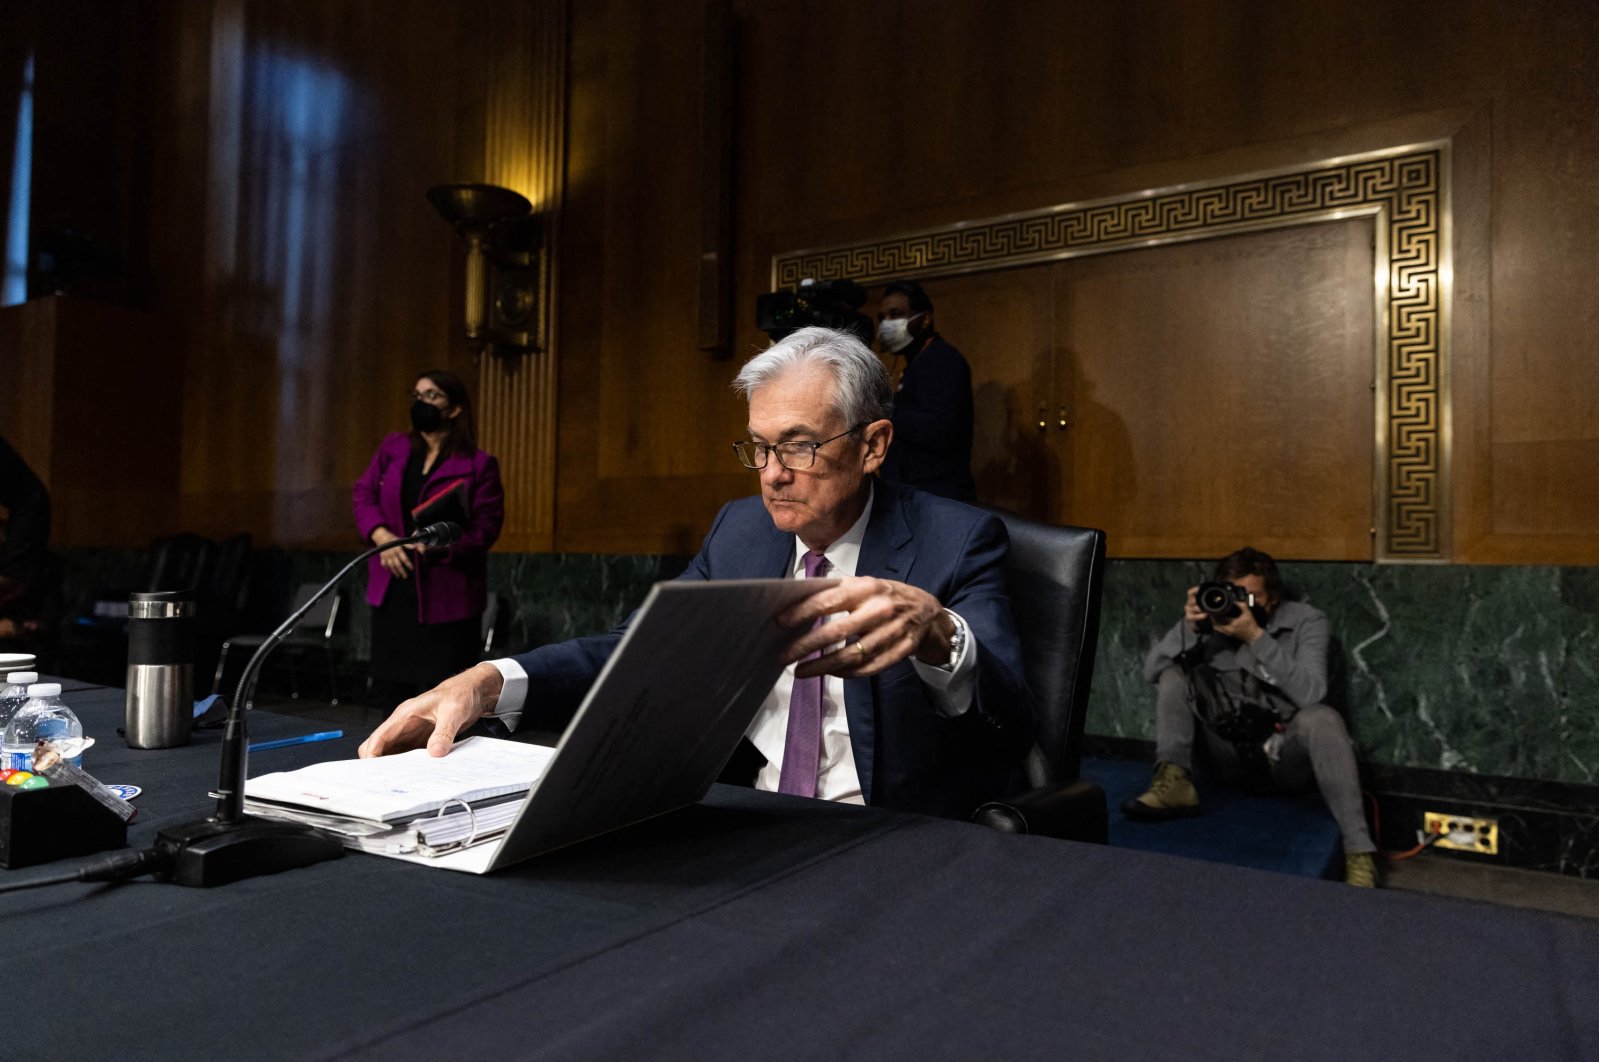 Jerome H. Powell, Nominee to be Chairperson of the Board of Governors of the Federal Reserve prepares to leave at the conclusion of a Senate Banking, Housing and Urban Affairs confirmation hearing on Capitol Hill, , in Washington, D.C., Jan. 11, 2022. (AFP Photo)